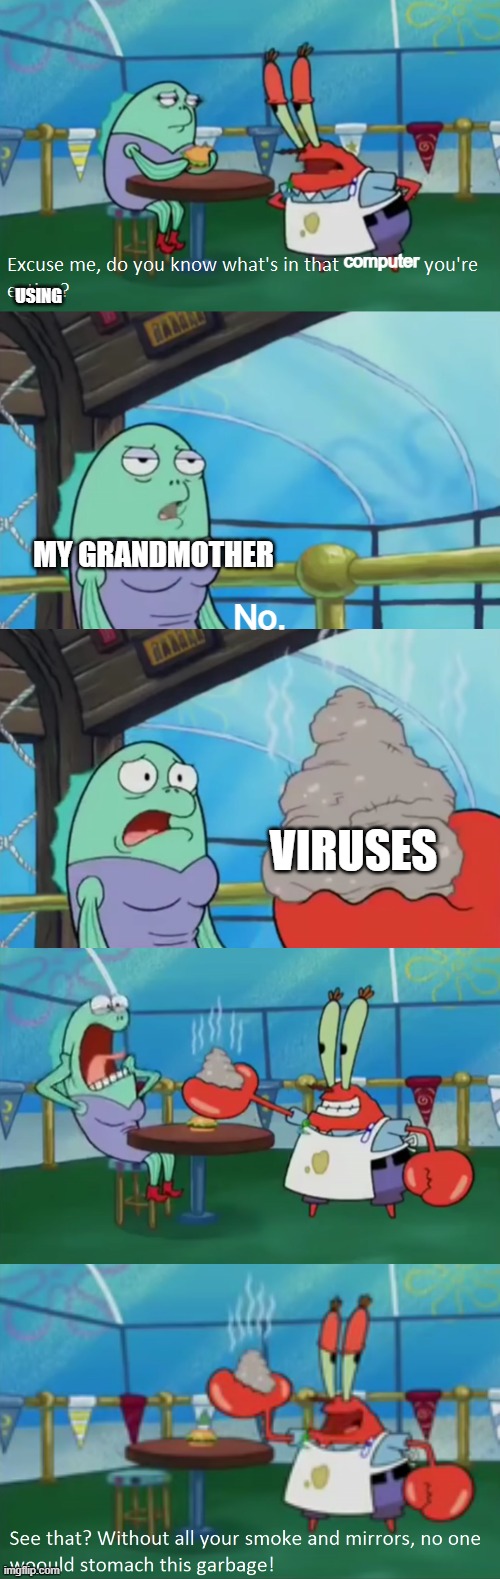 Excuse Me | computer; USING; MY GRANDMOTHER; No. VIRUSES | image tagged in excuse me | made w/ Imgflip meme maker